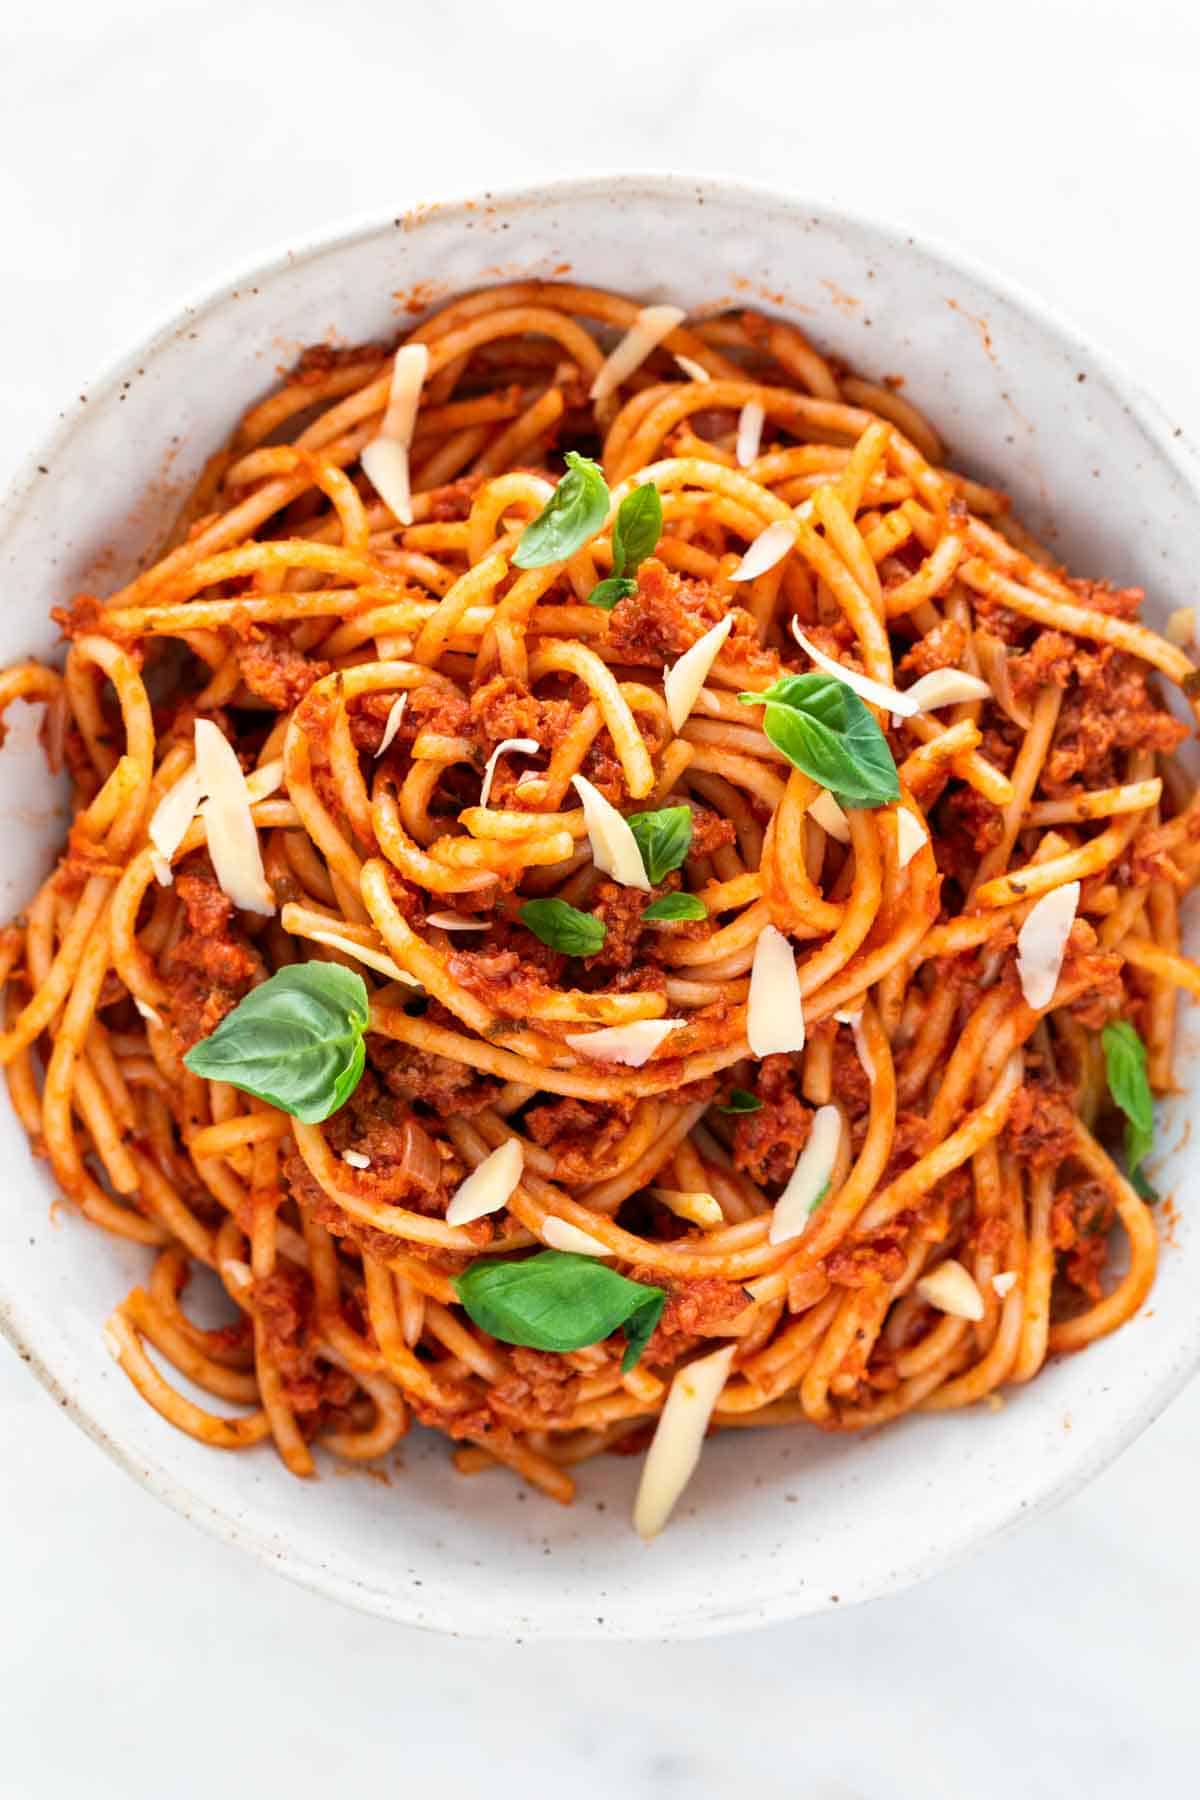 A bowl of vegan spaghetti with vegan cheese and basil on top.